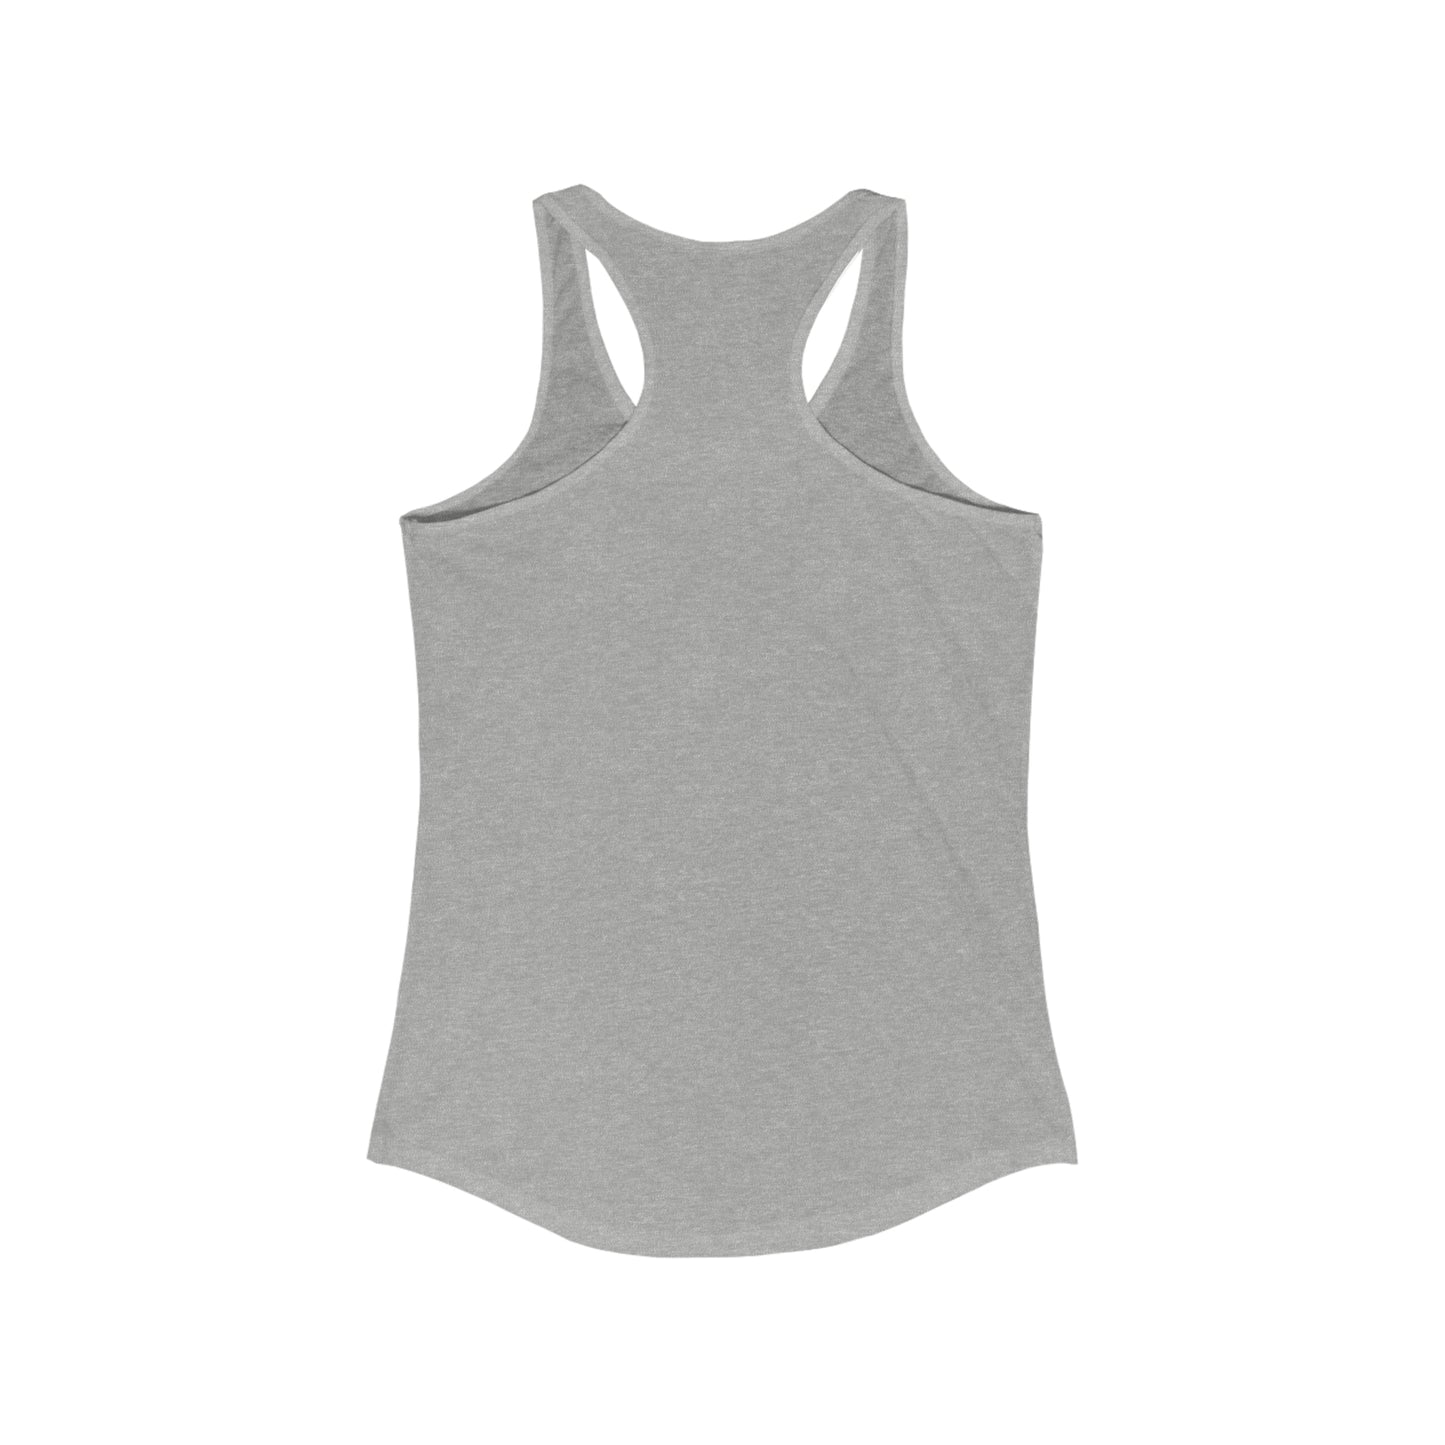 Blind To The World But His Greatest Treasure  slim fit tank-top